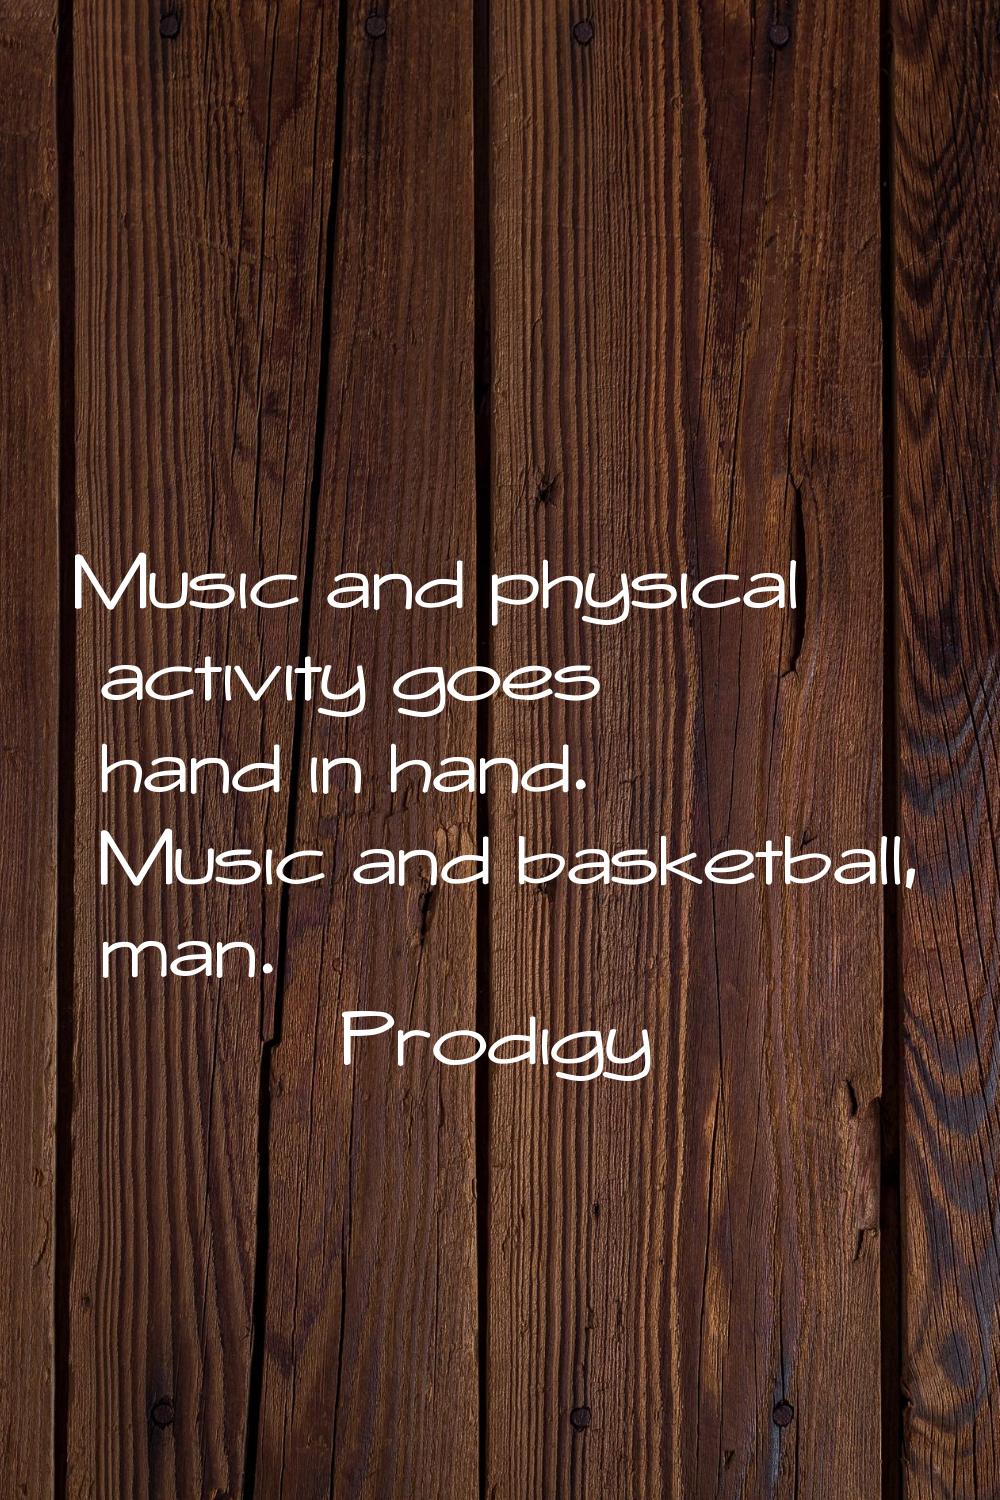 Music and physical activity goes hand in hand. Music and basketball, man.